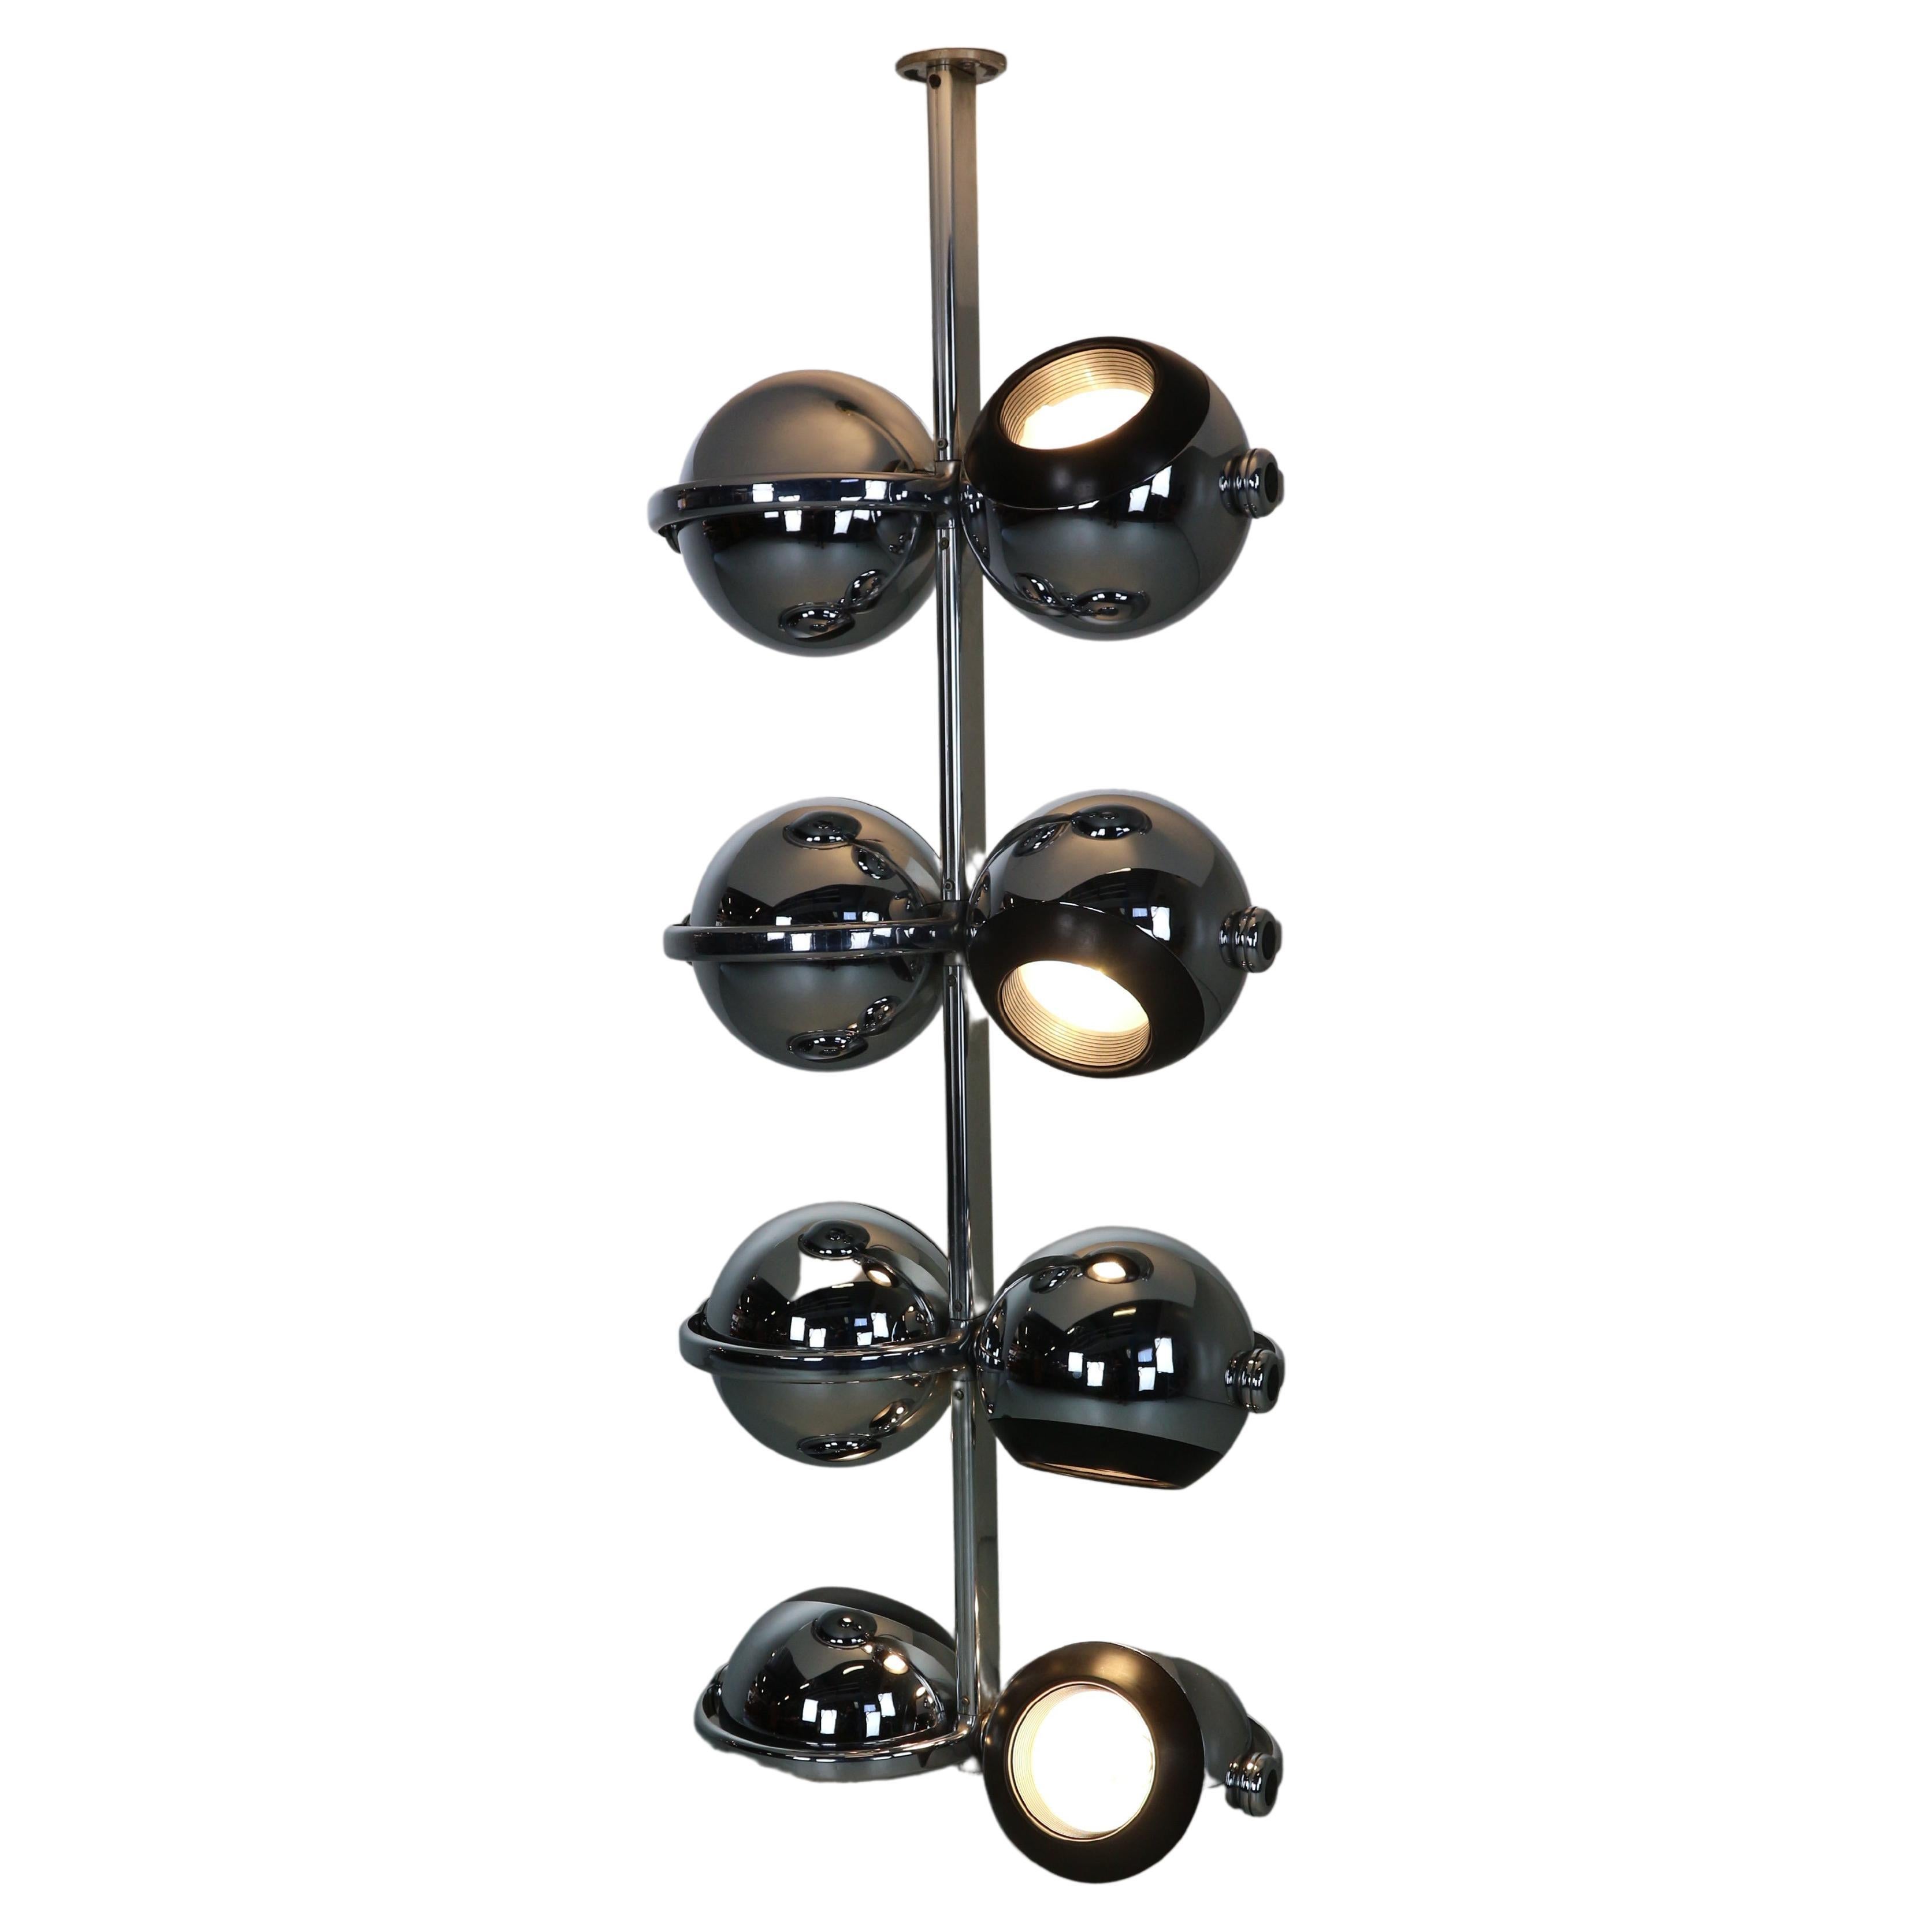 Large Terence Conran Space Age German Steel Chandelier for Erco, 1970s